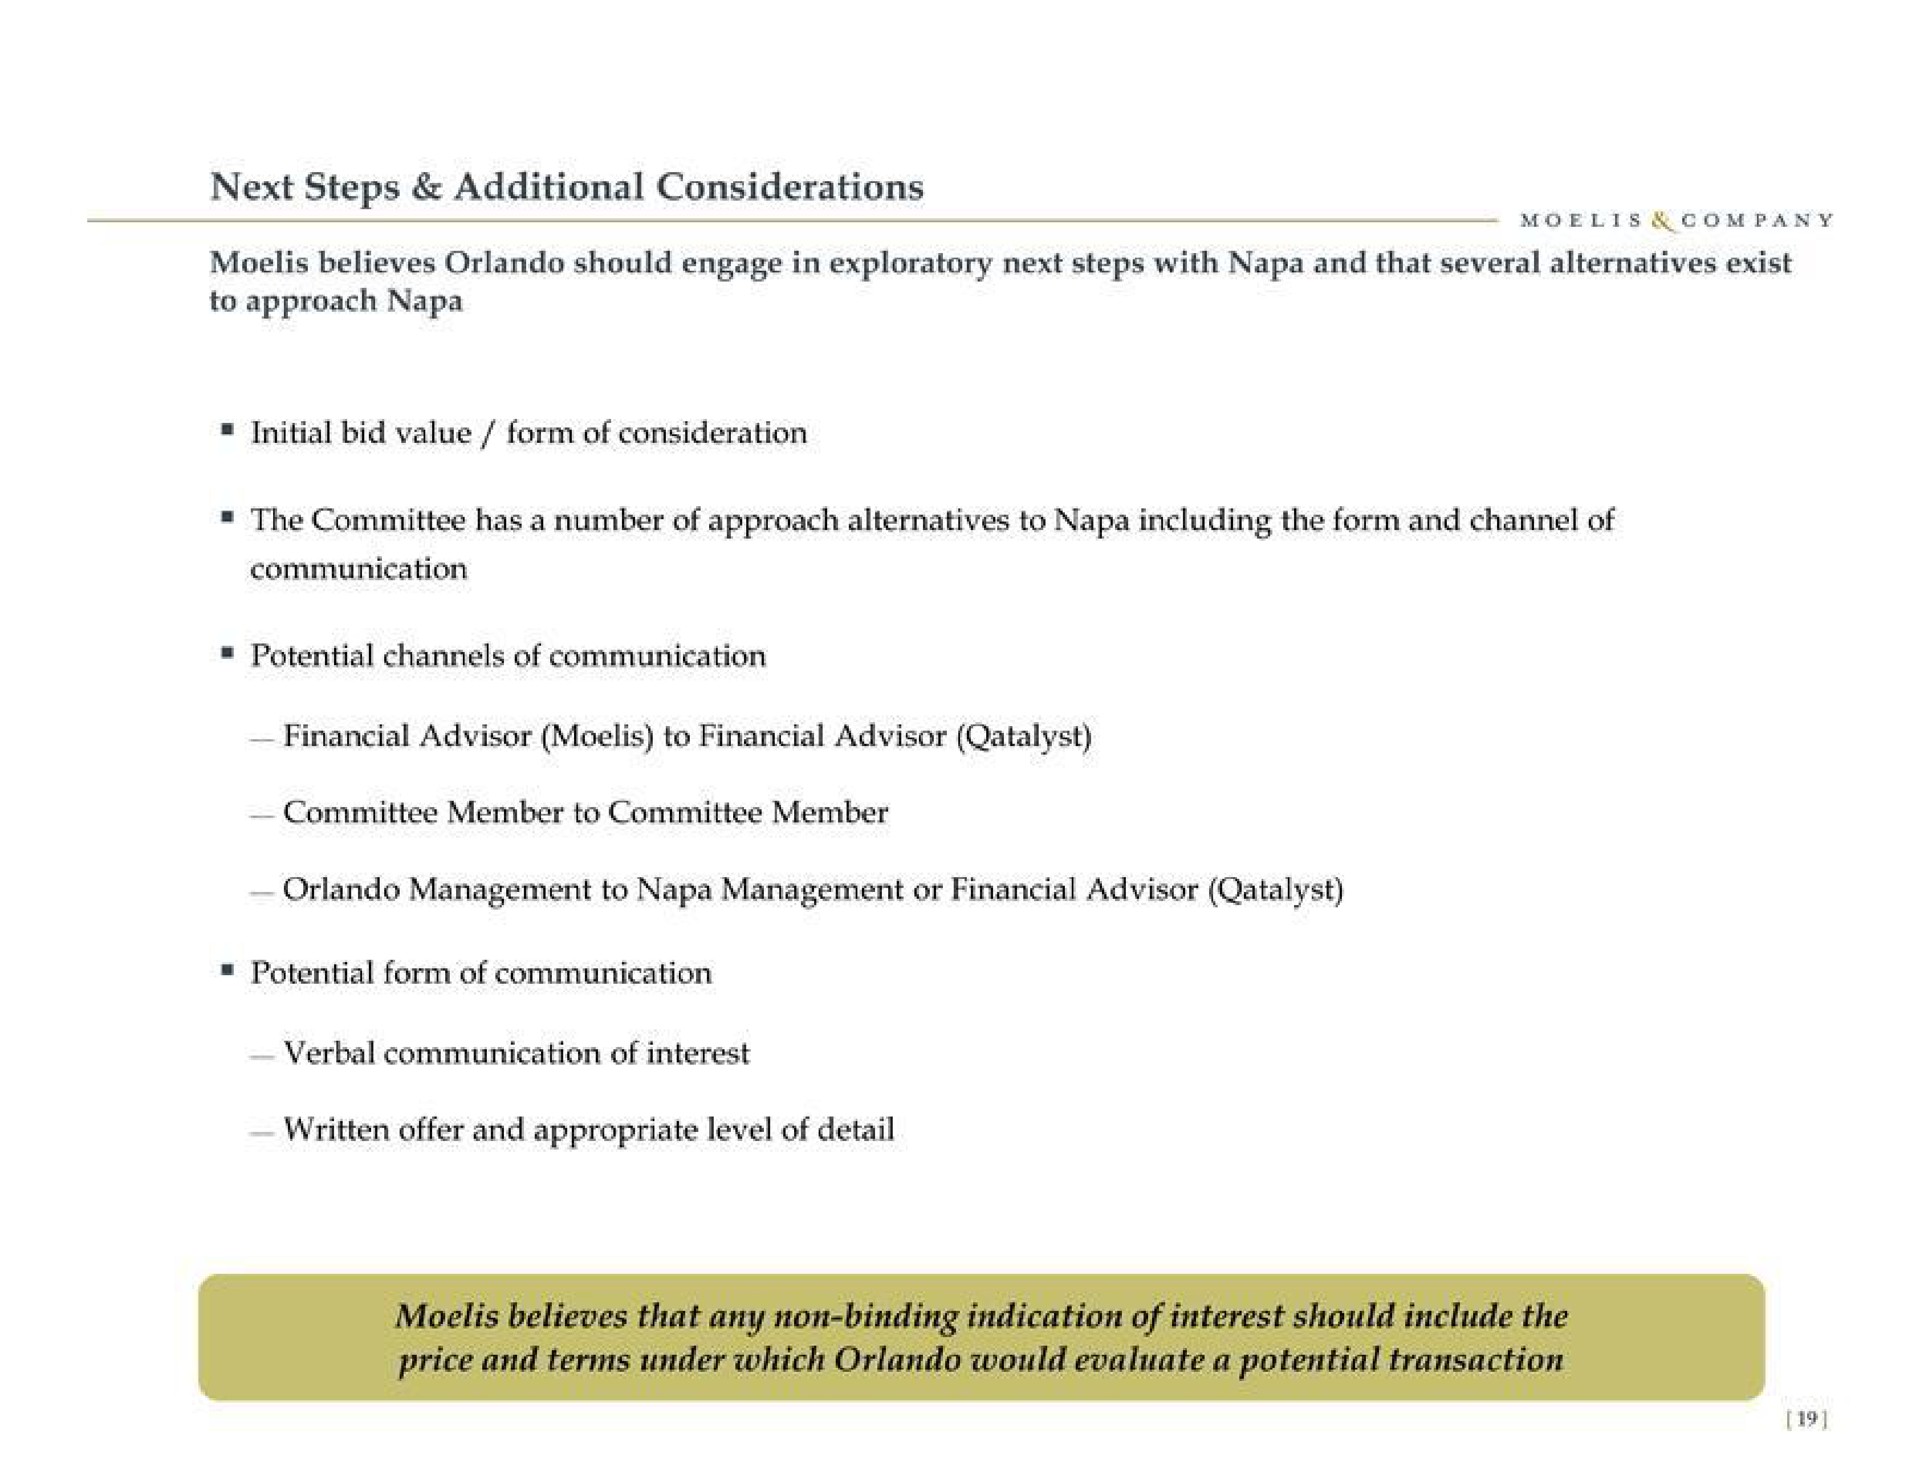 next steps additional considerations believes should engage in exploratory next steps with napa and that several alternatives exist initial bid value form of consideration the committee has a number of approach alternatives to napa including the form and channel of communication potential channels of communication financial advisor to financial advisor committee member to committee member management to napa management or financial advisor potential form of communication written offer and appropriate level of detail | Moelis & Company